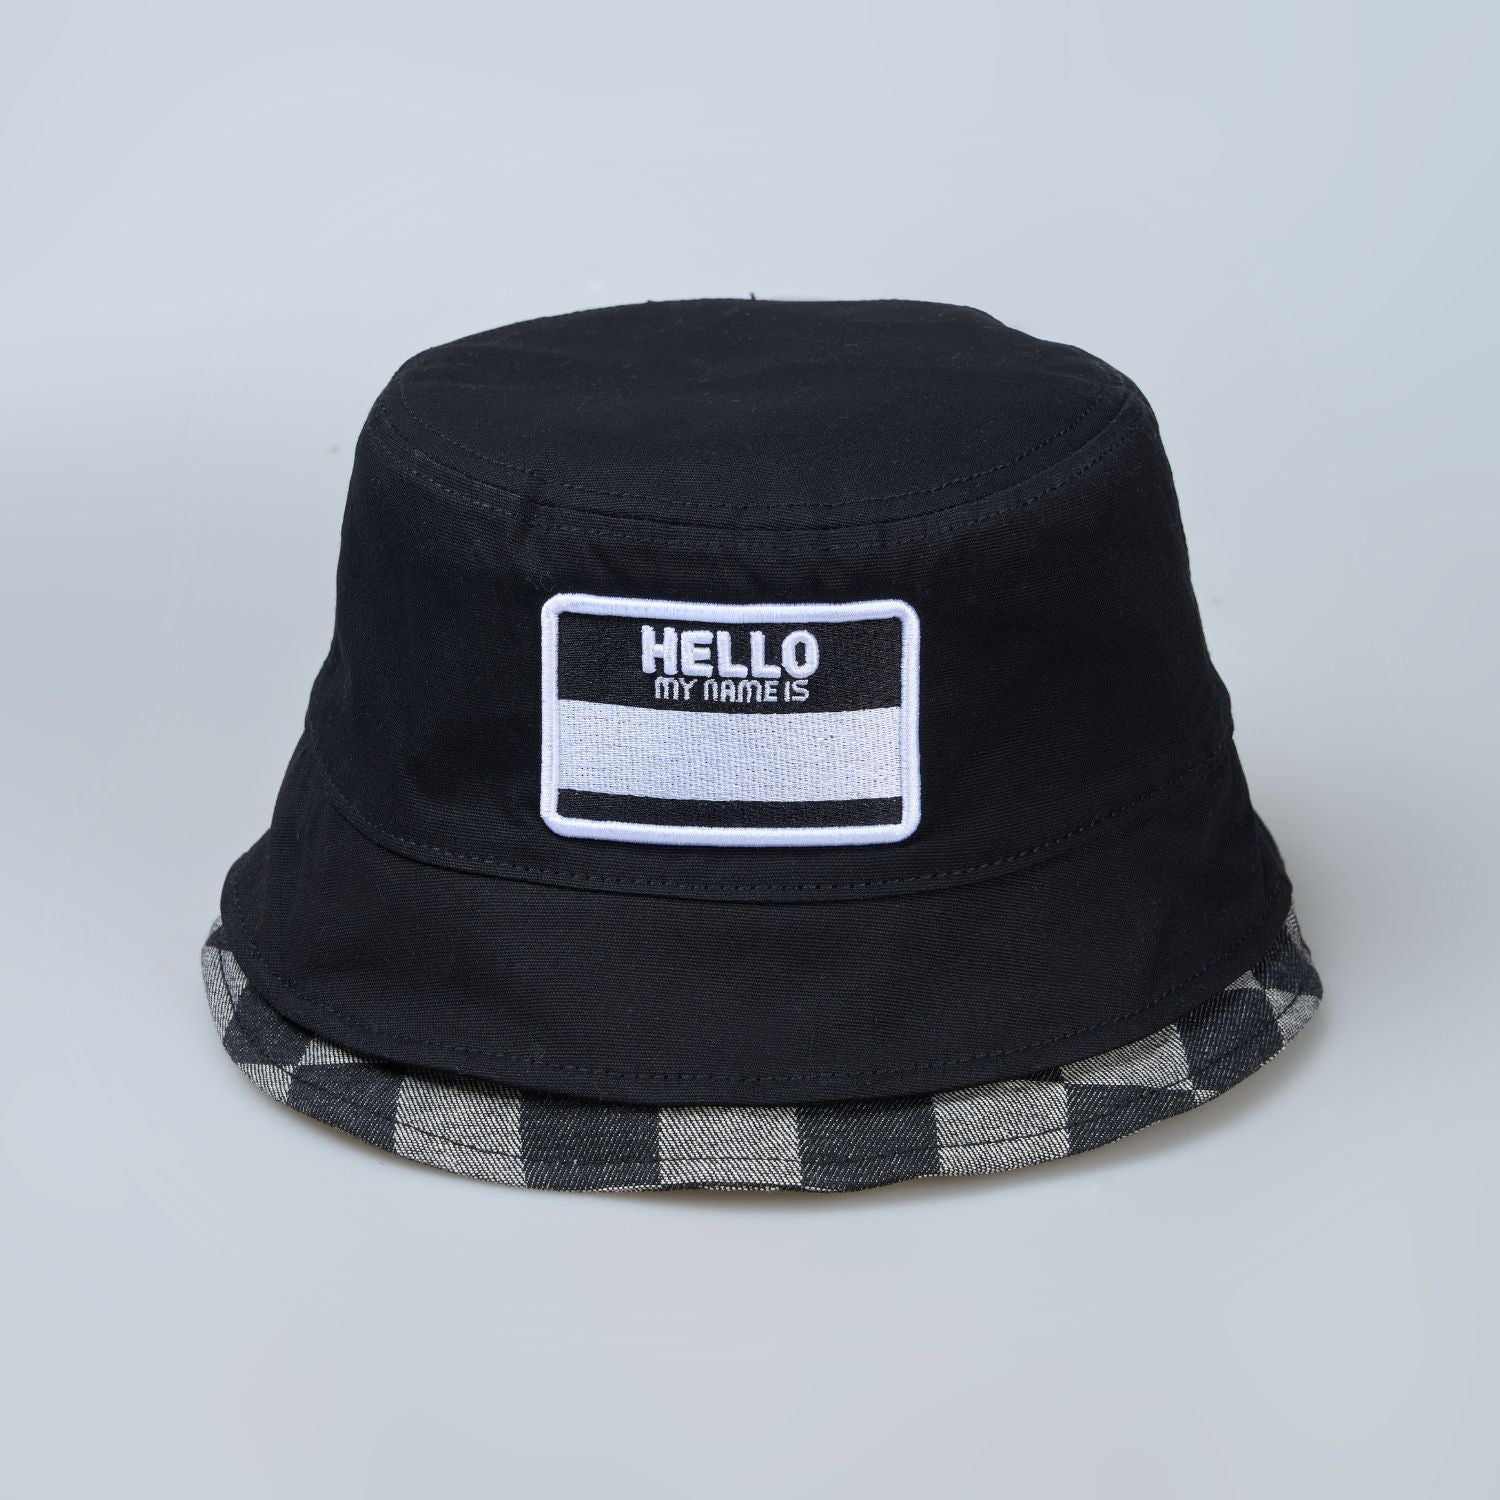 Black colored, chequered pattern, lightweight bucket hat for men